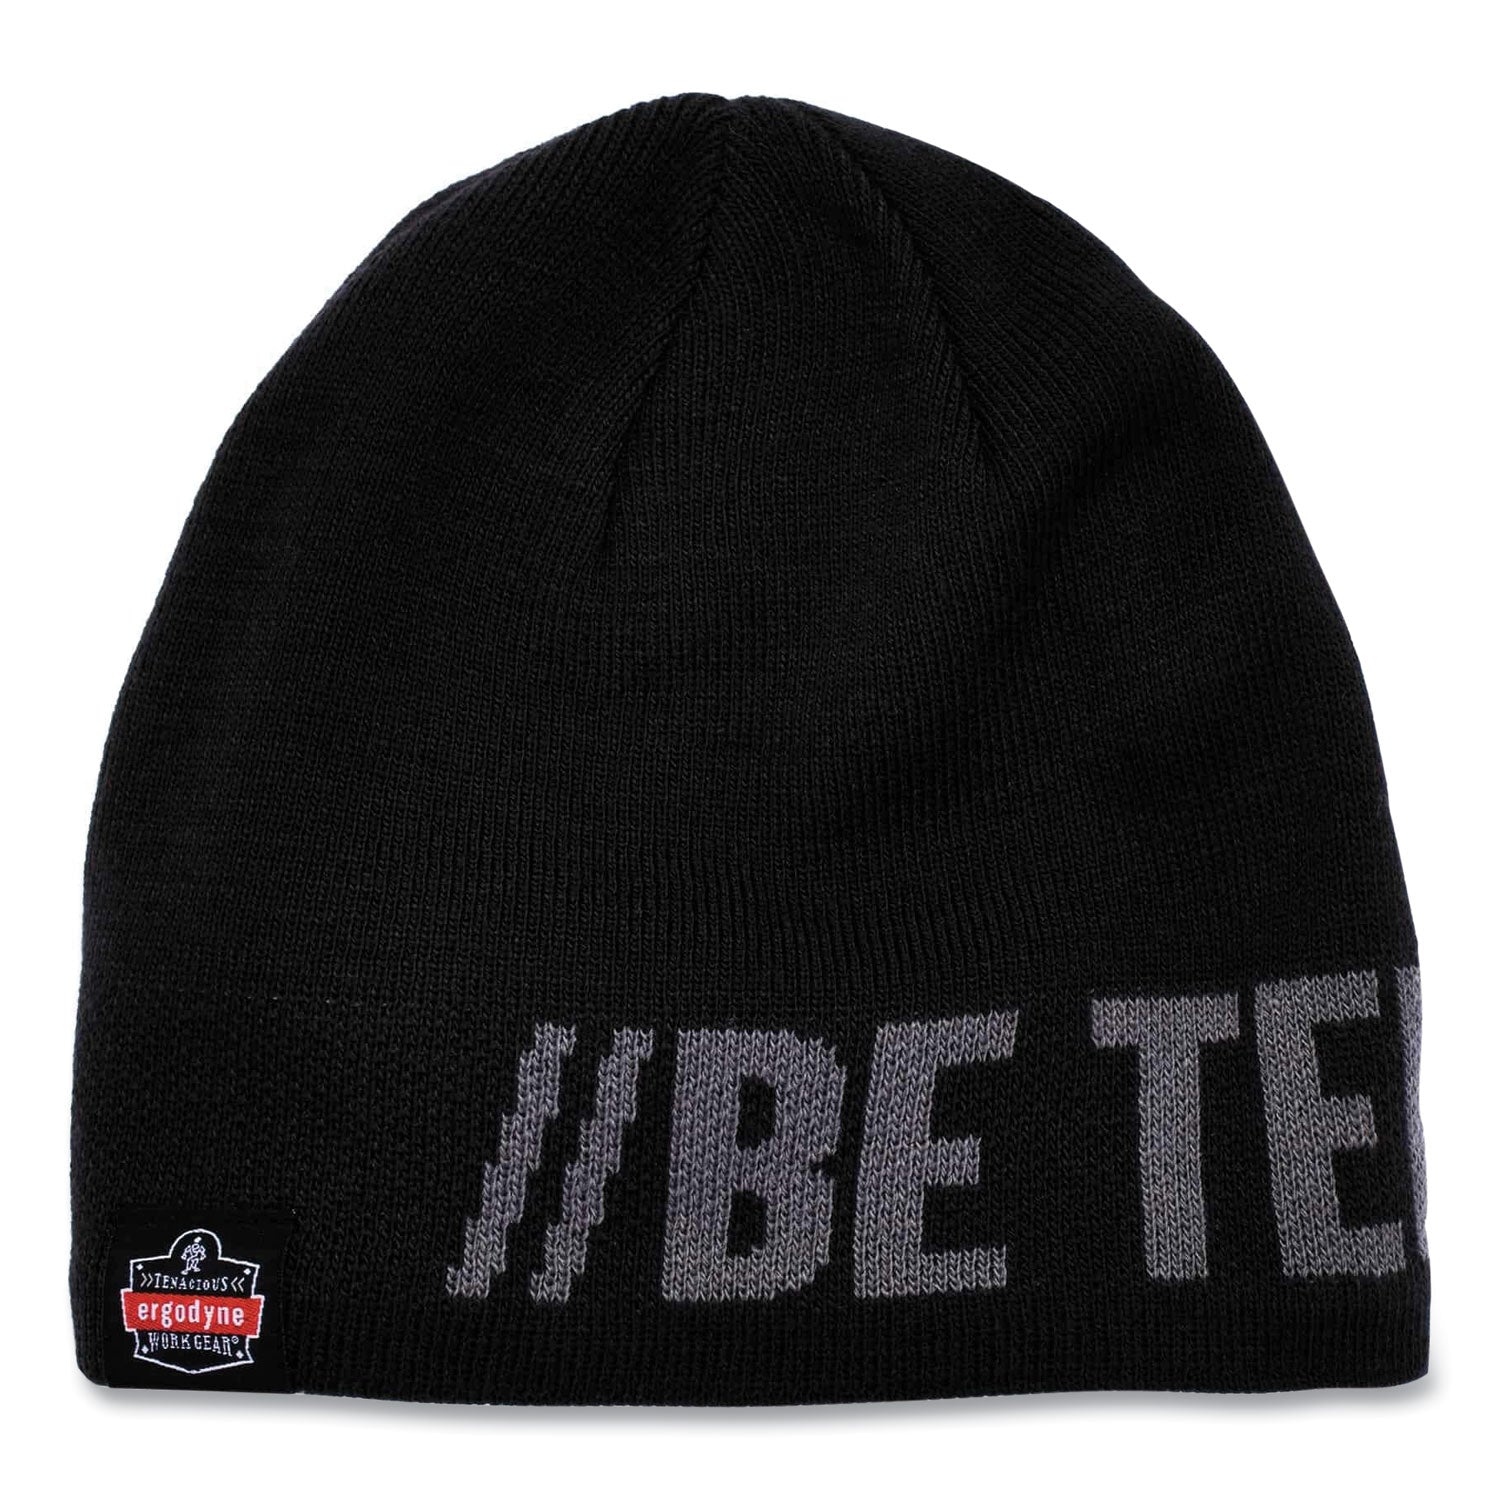 n-ferno-6819bt-be-tenacious-beanie-one-size-fits-most-charcoal-ships-in-1-3-business-days_ego16819bt - 1